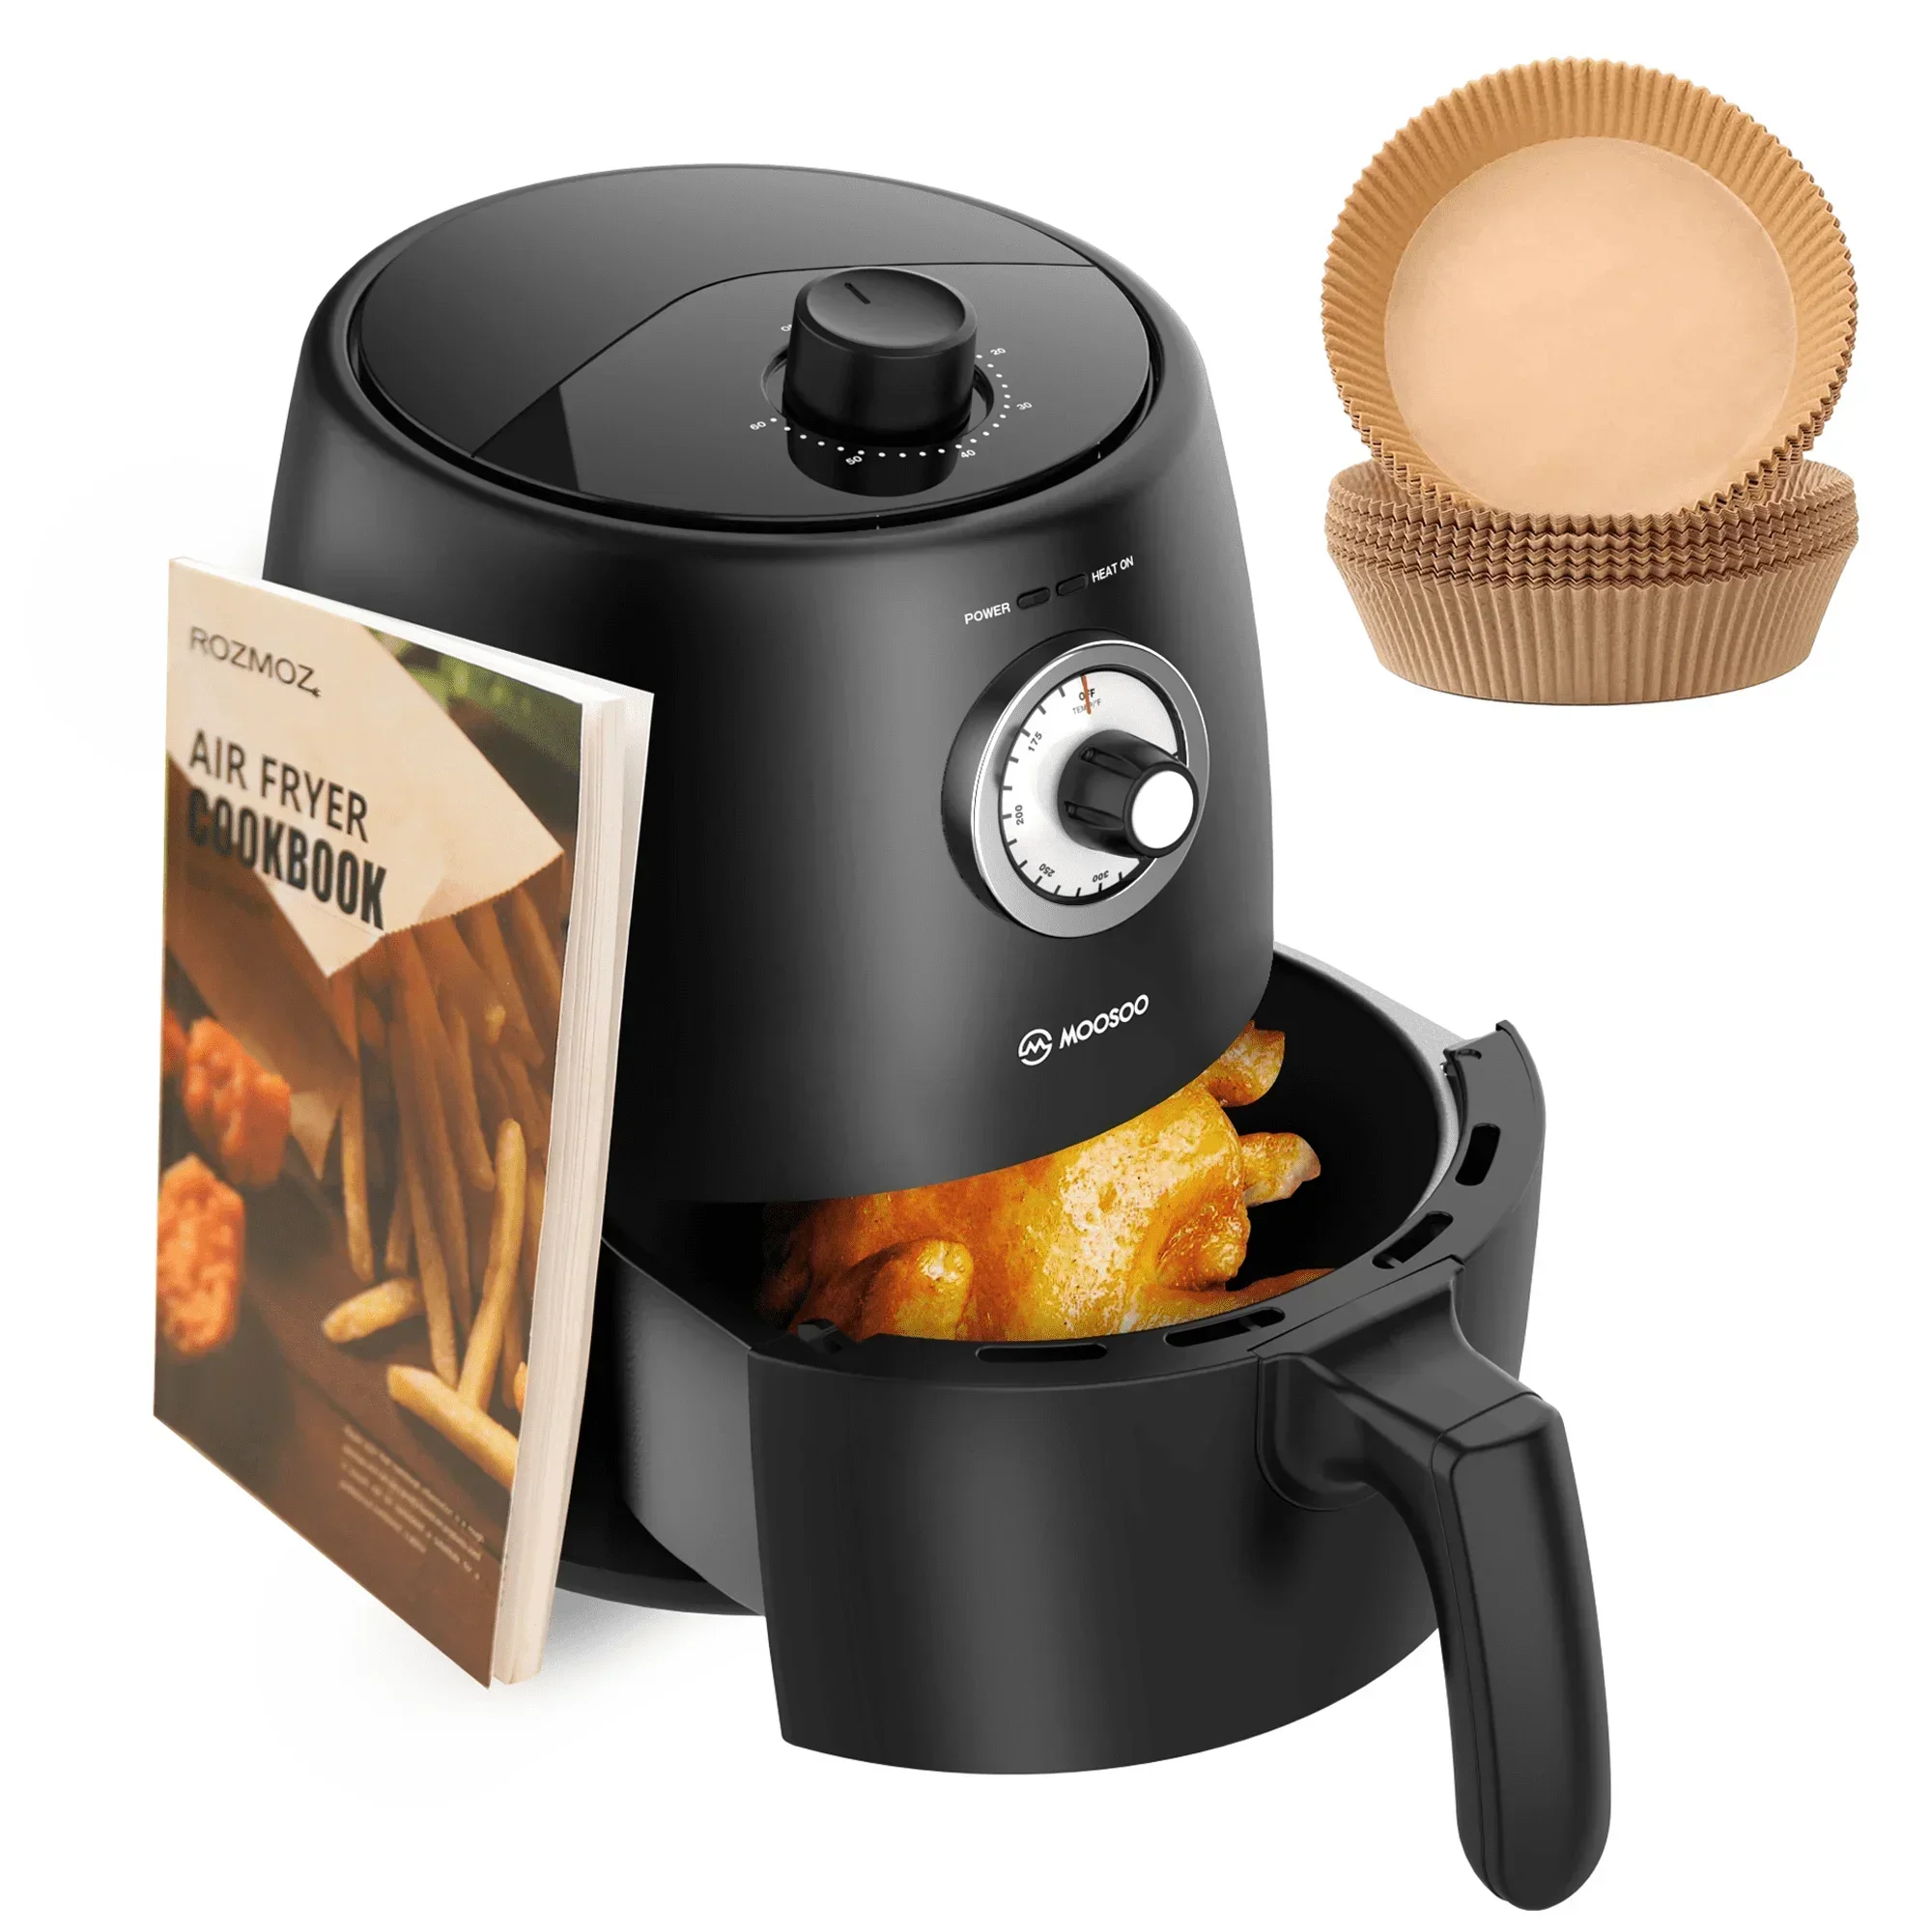 

MOOSOO Air Fryer 2Qt, Compact Small Air Fryer Oven with Air Fryer Liners and Knob Control